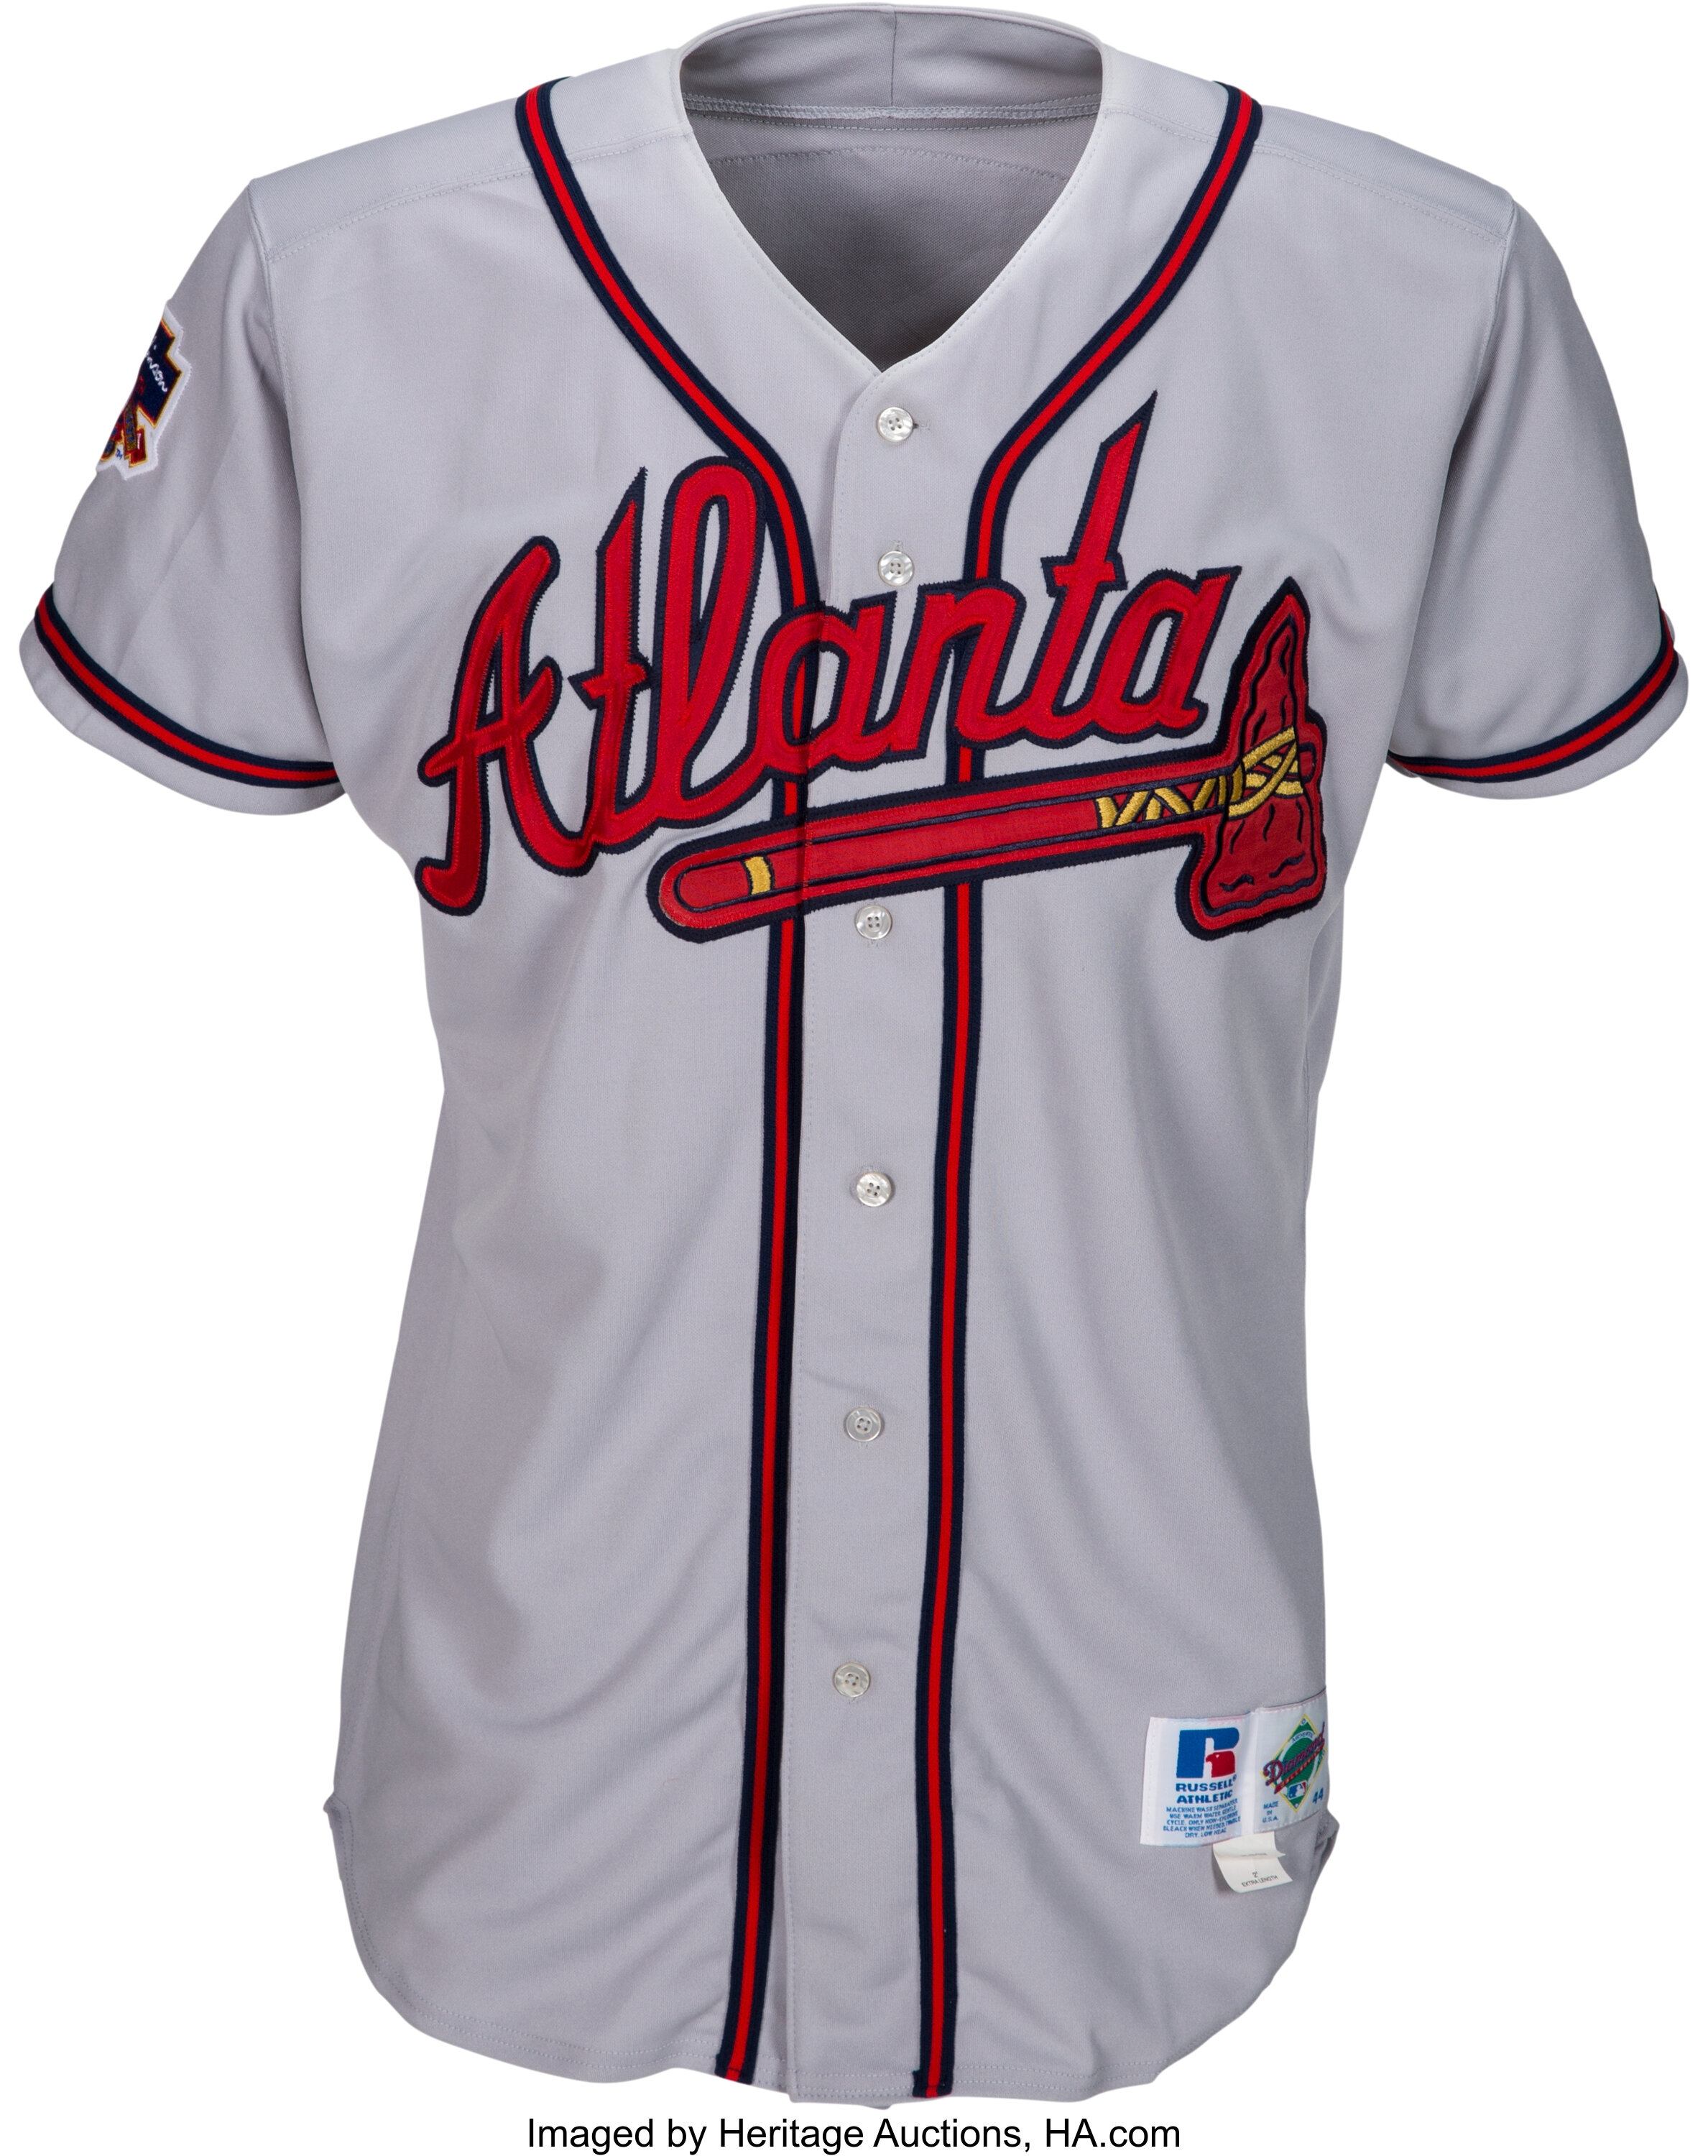 Greg Maddux Atlanta Braves Player Issued Signed Jersey 1997 Throwback Auto